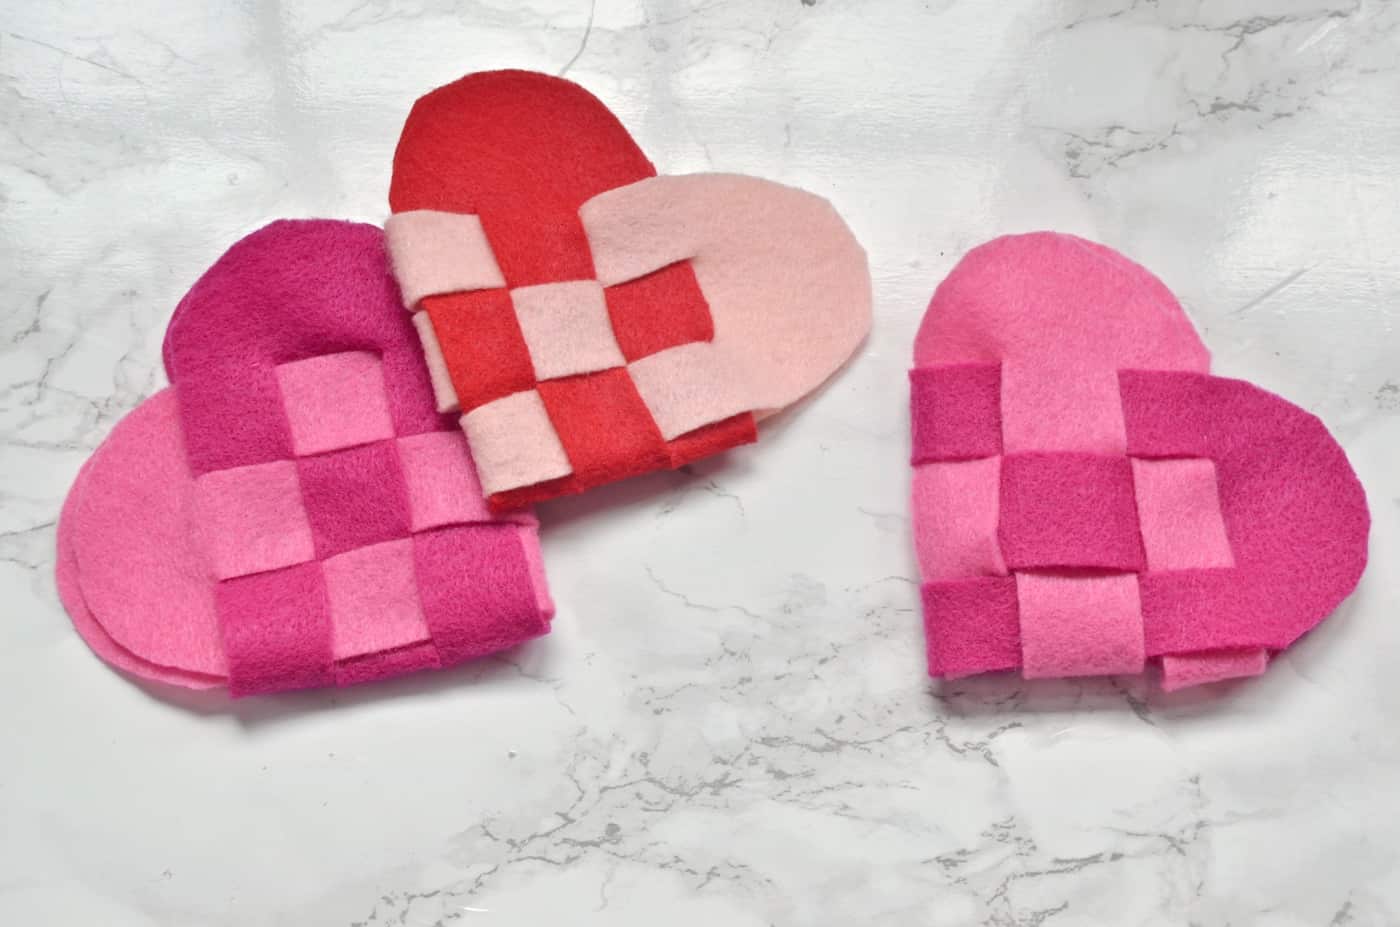 Simple and fast valentine's day crafts for under $1.